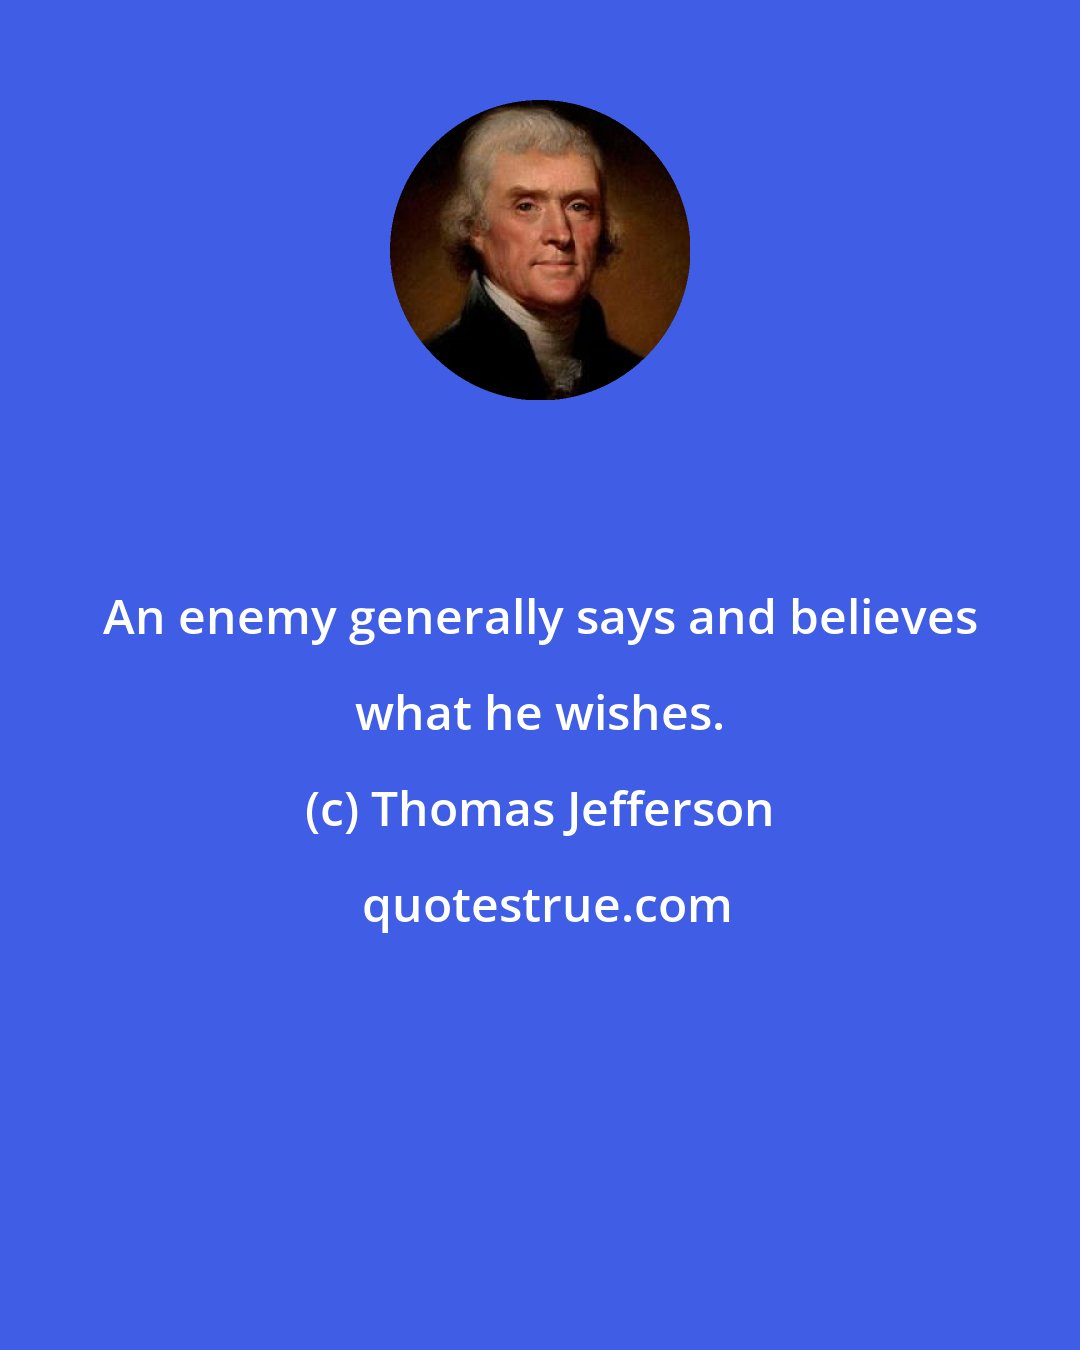 Thomas Jefferson: An enemy generally says and believes what he wishes.